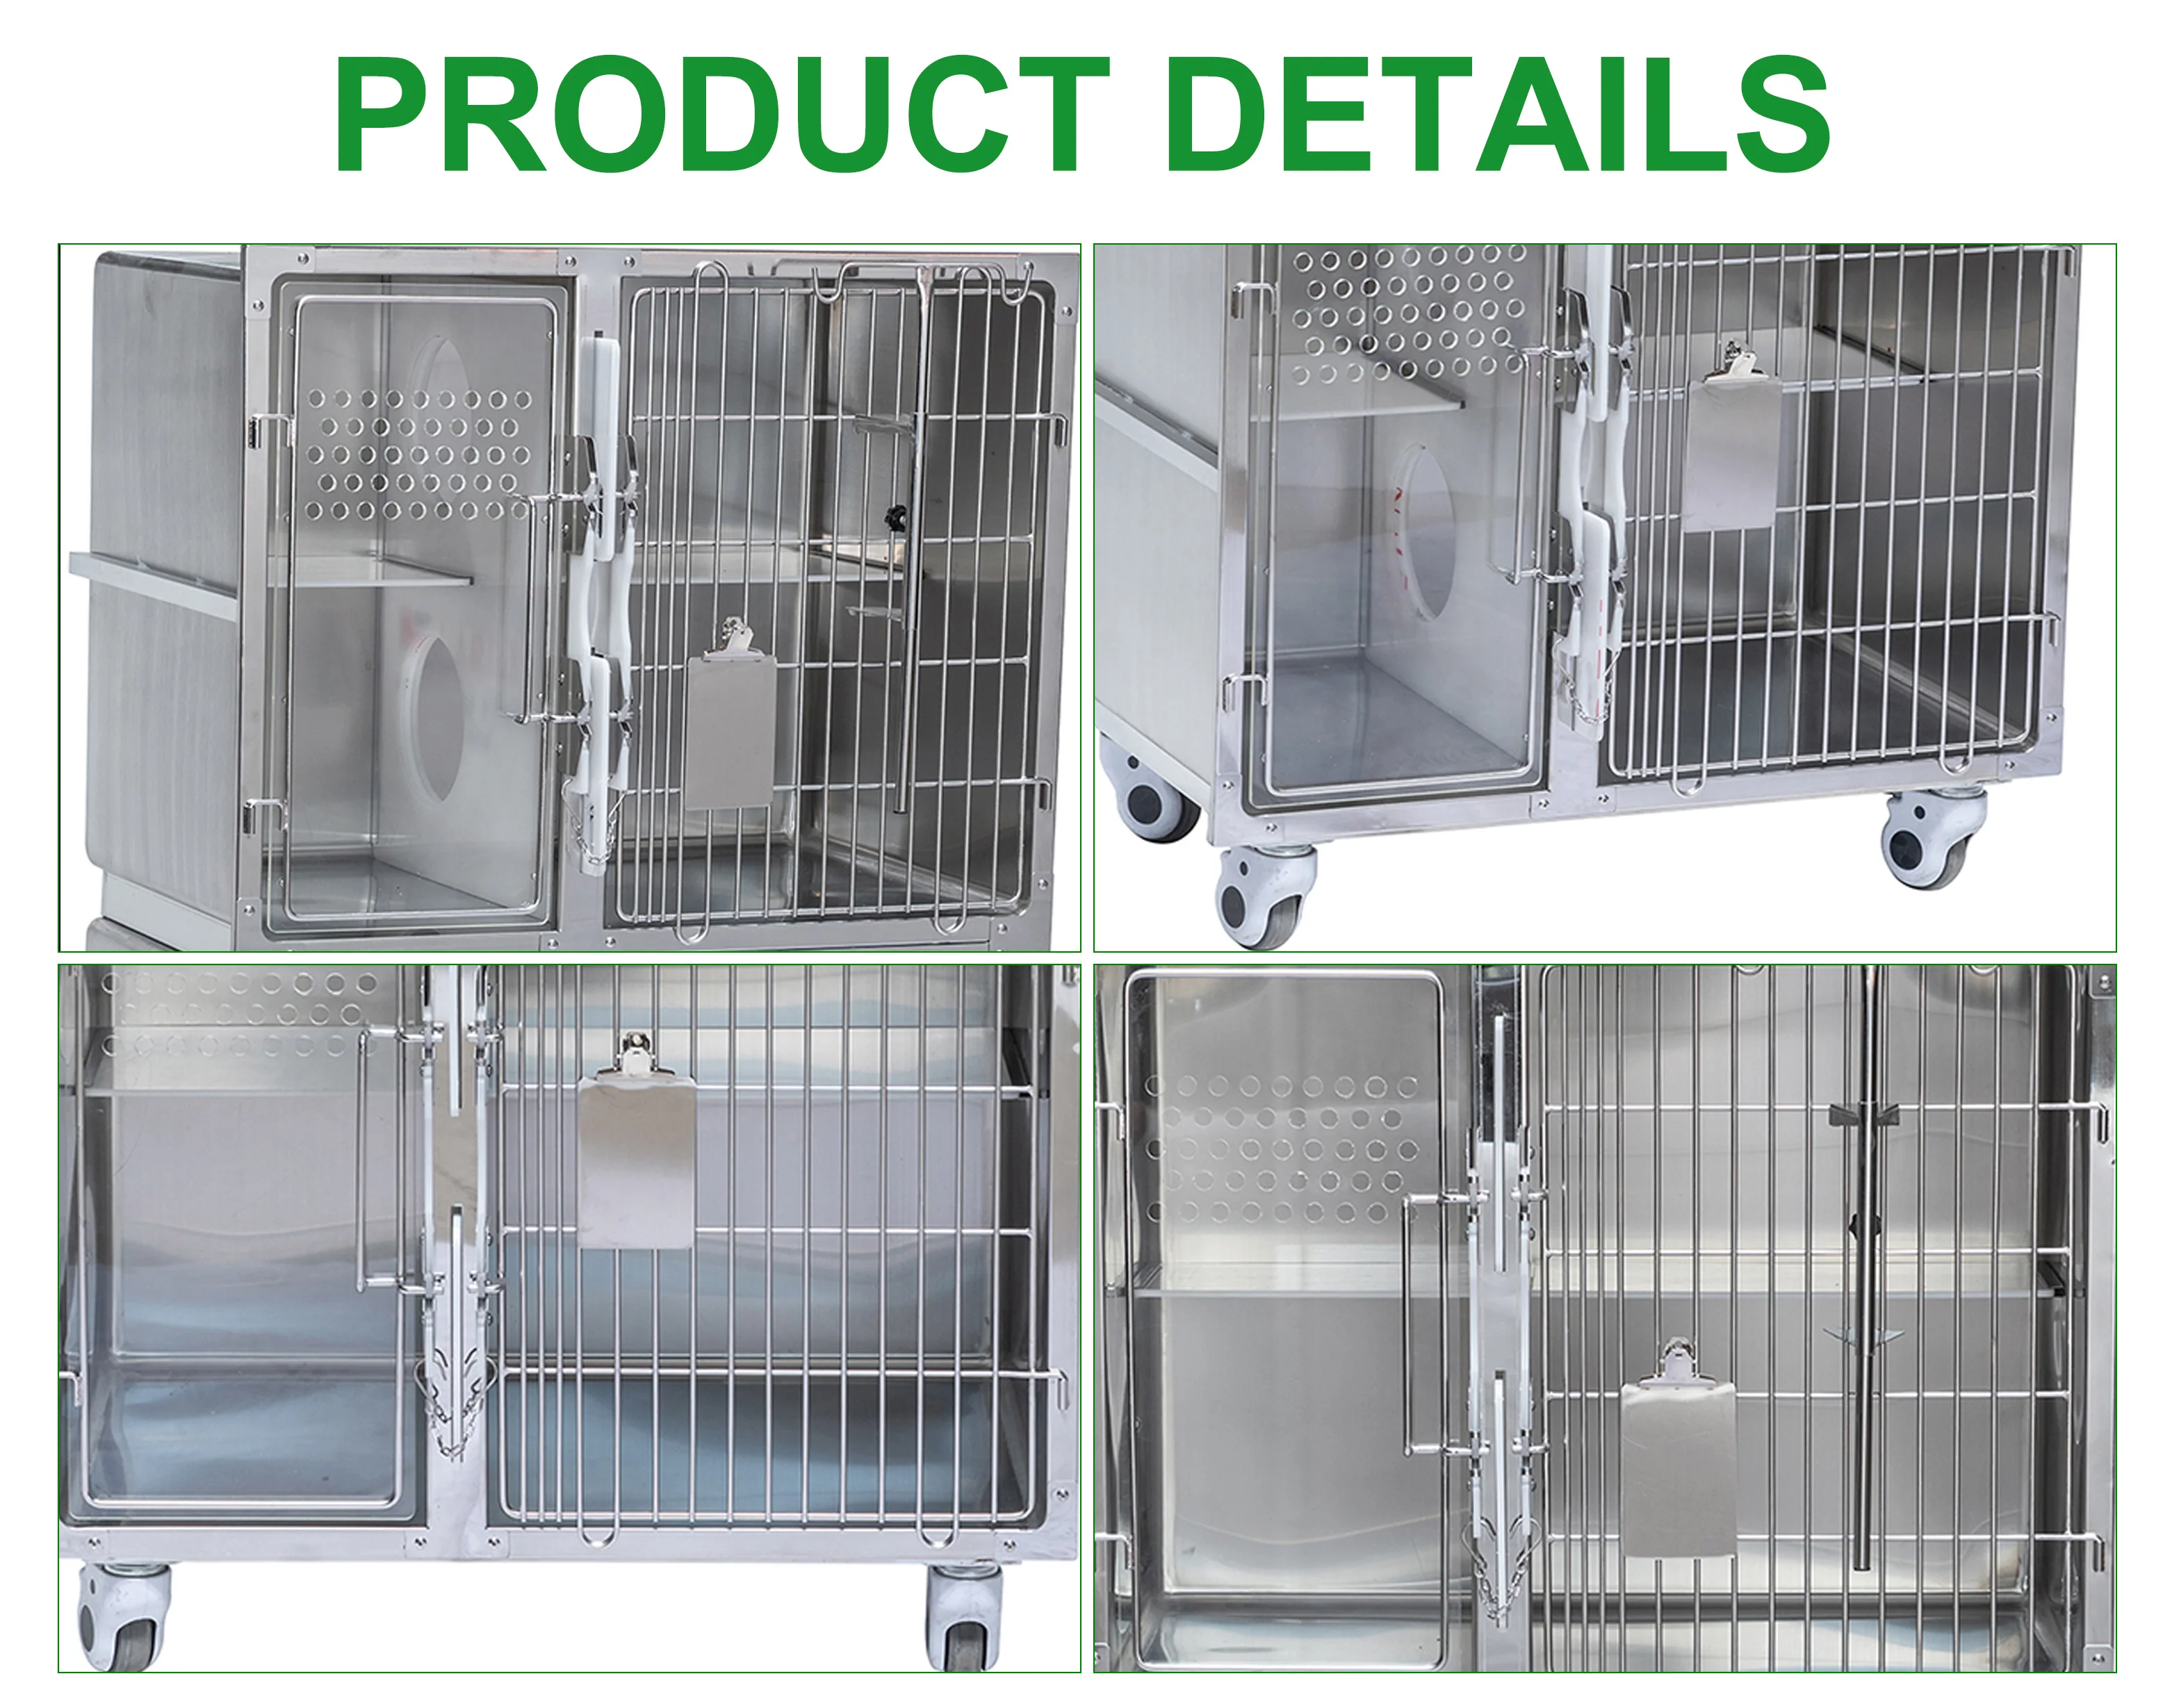 IN-V006 Combined Type Stainless Steel Display Cage Vet Cage Pet Carrier Animal Cage for Vet Clinic